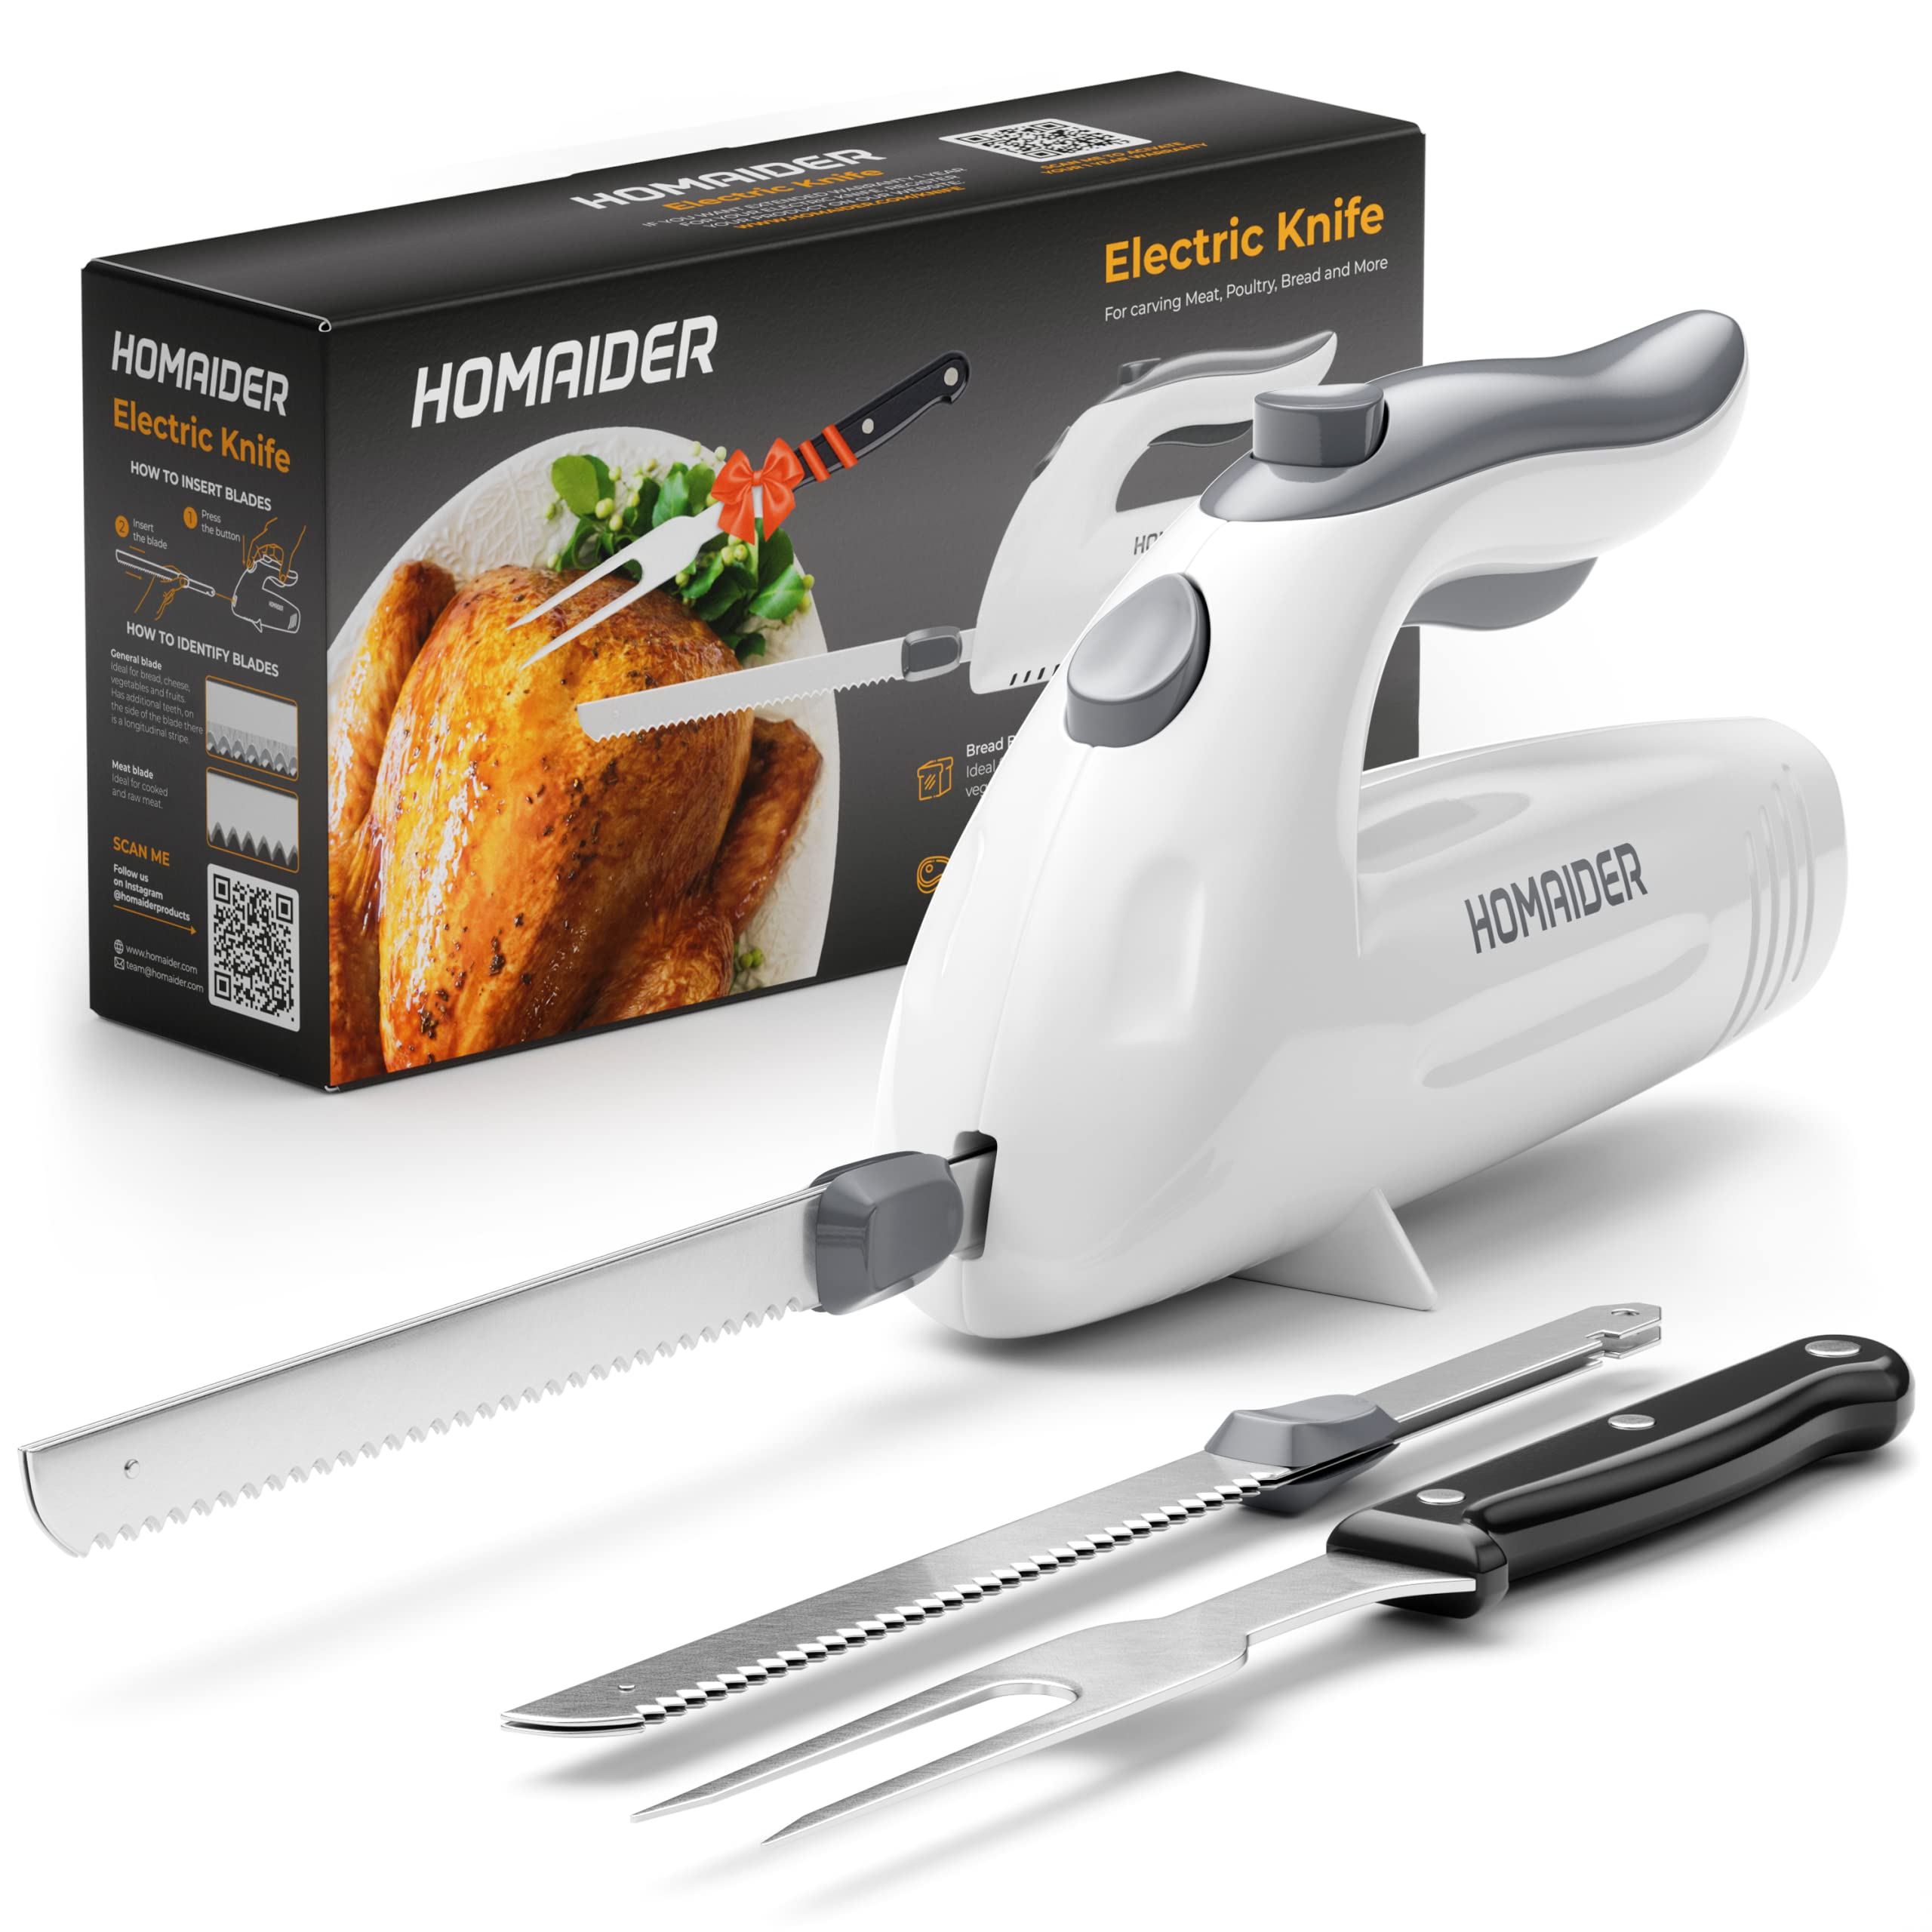 Homaider Electric Knife for carving Meat, Turkey, Bread & More Serving Fork and carving Blades Included